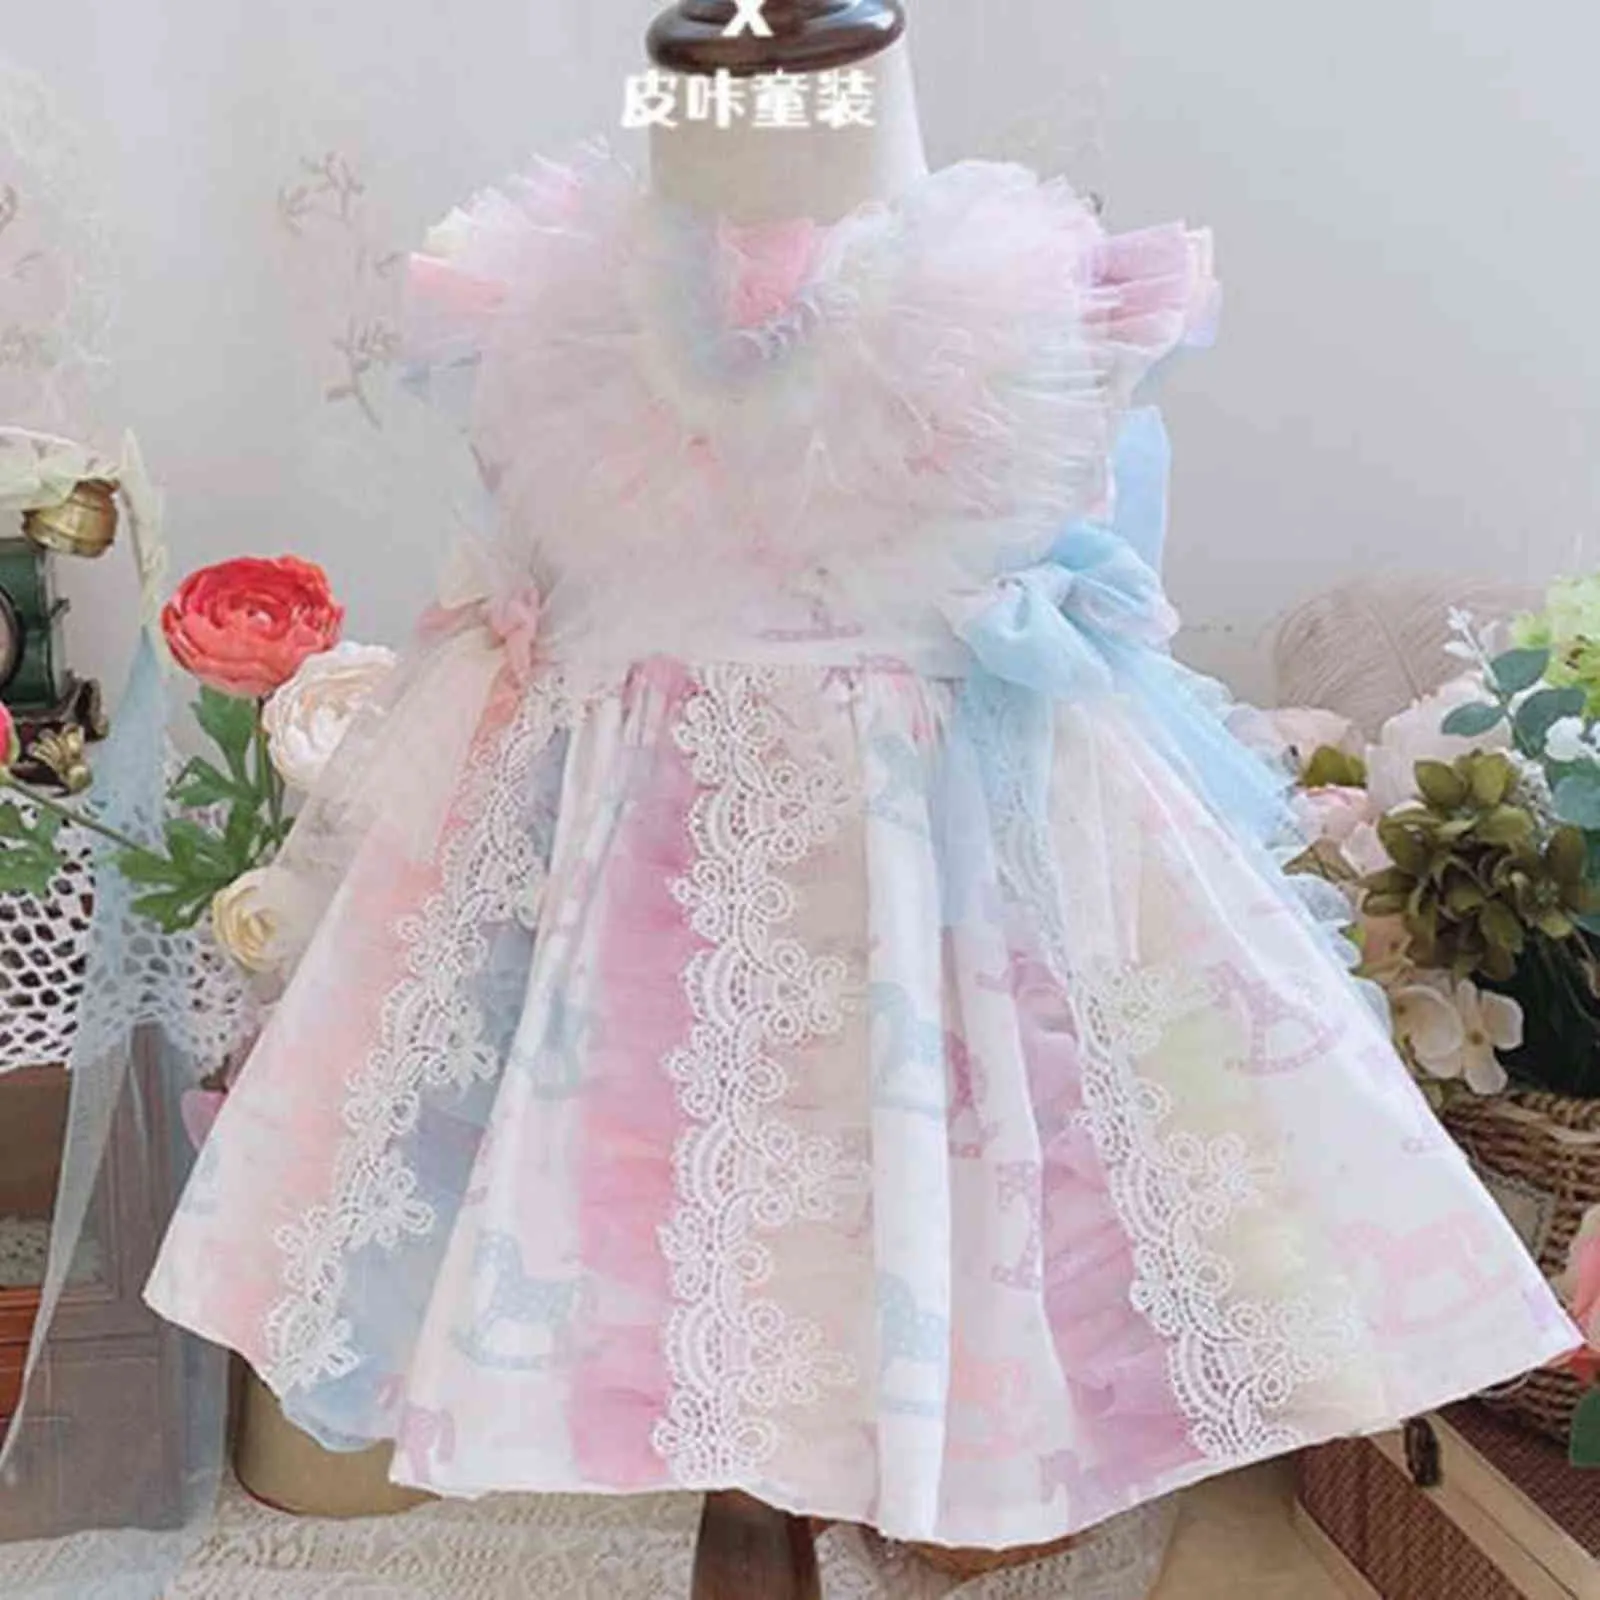 2021 summer vintage baby girl Spanish lolita princess dress kids casual lace mesh stitching birthday party ball gown dress G1129